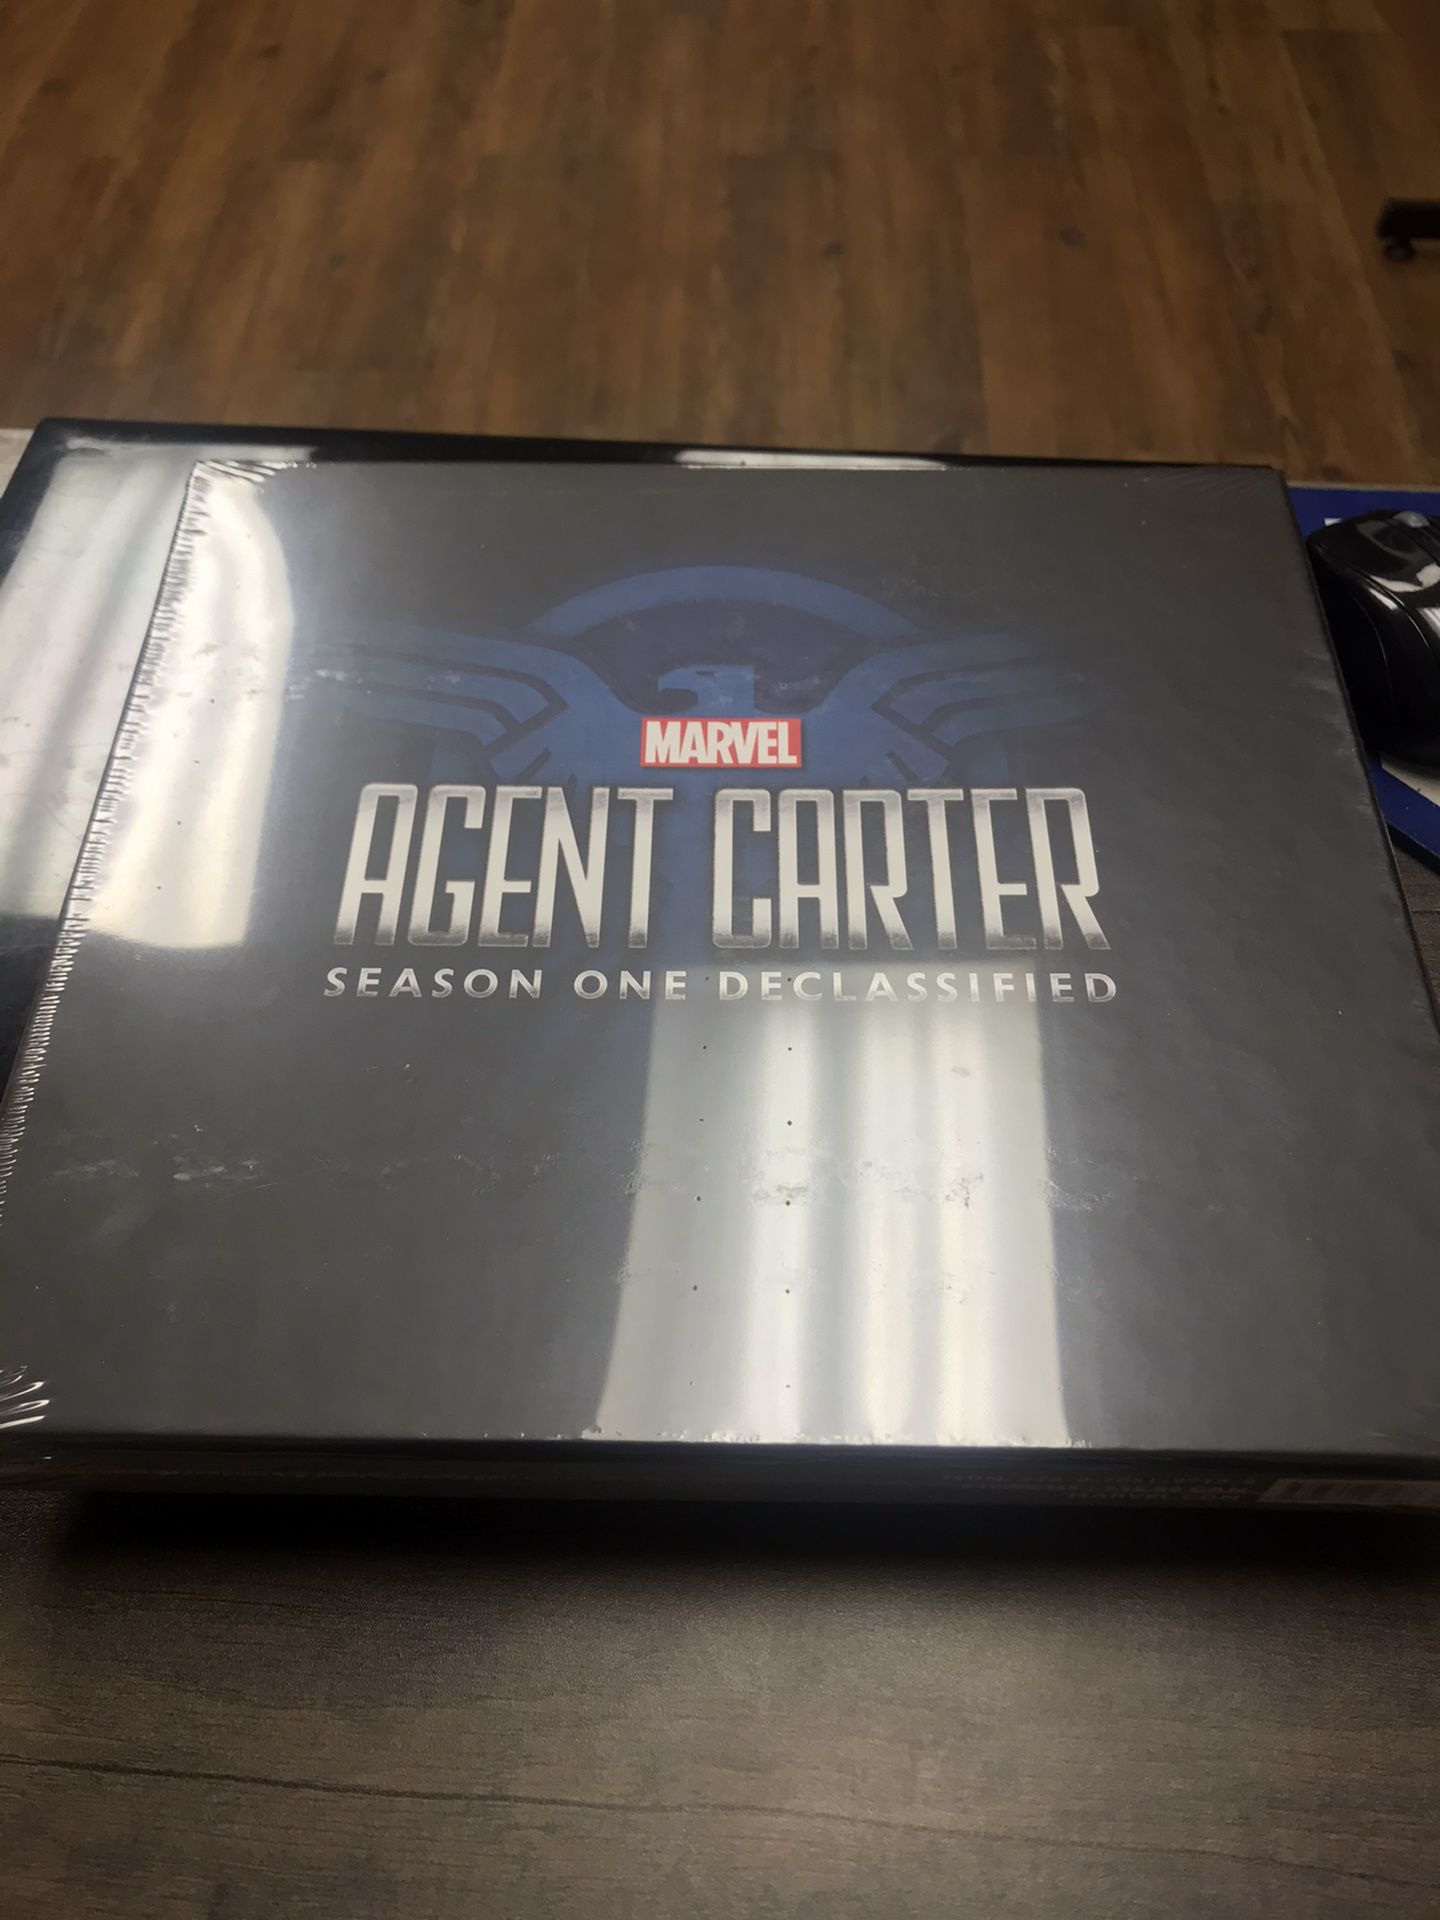 NEW - Marvel's Agent Carter: Season One Declassified by Marvel Comics